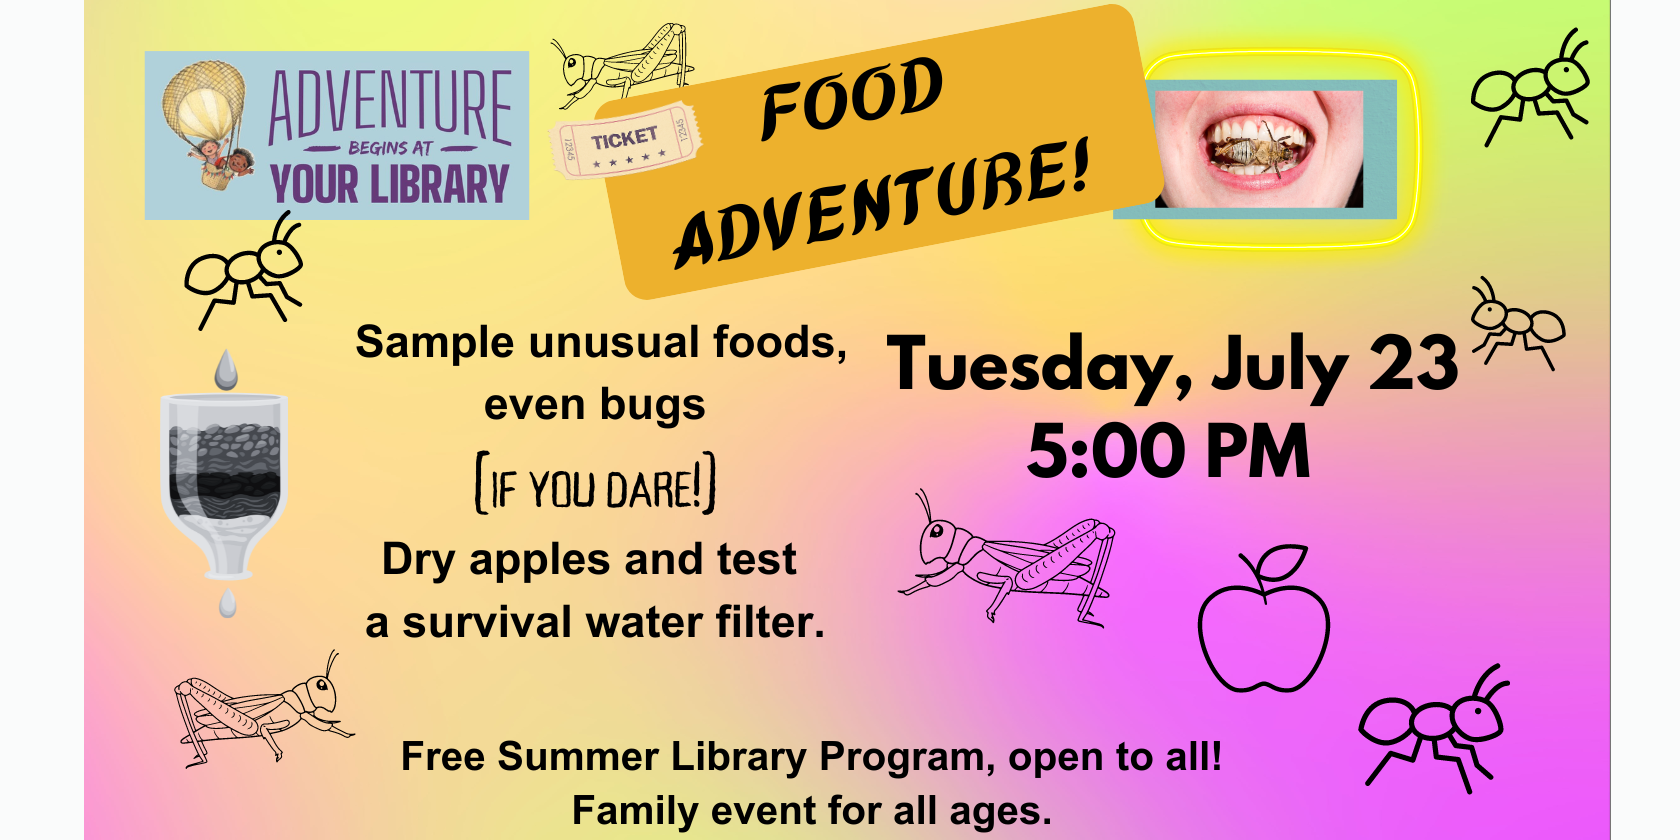 Food Adventures - Tuesday, July 23 at 5:00 PM